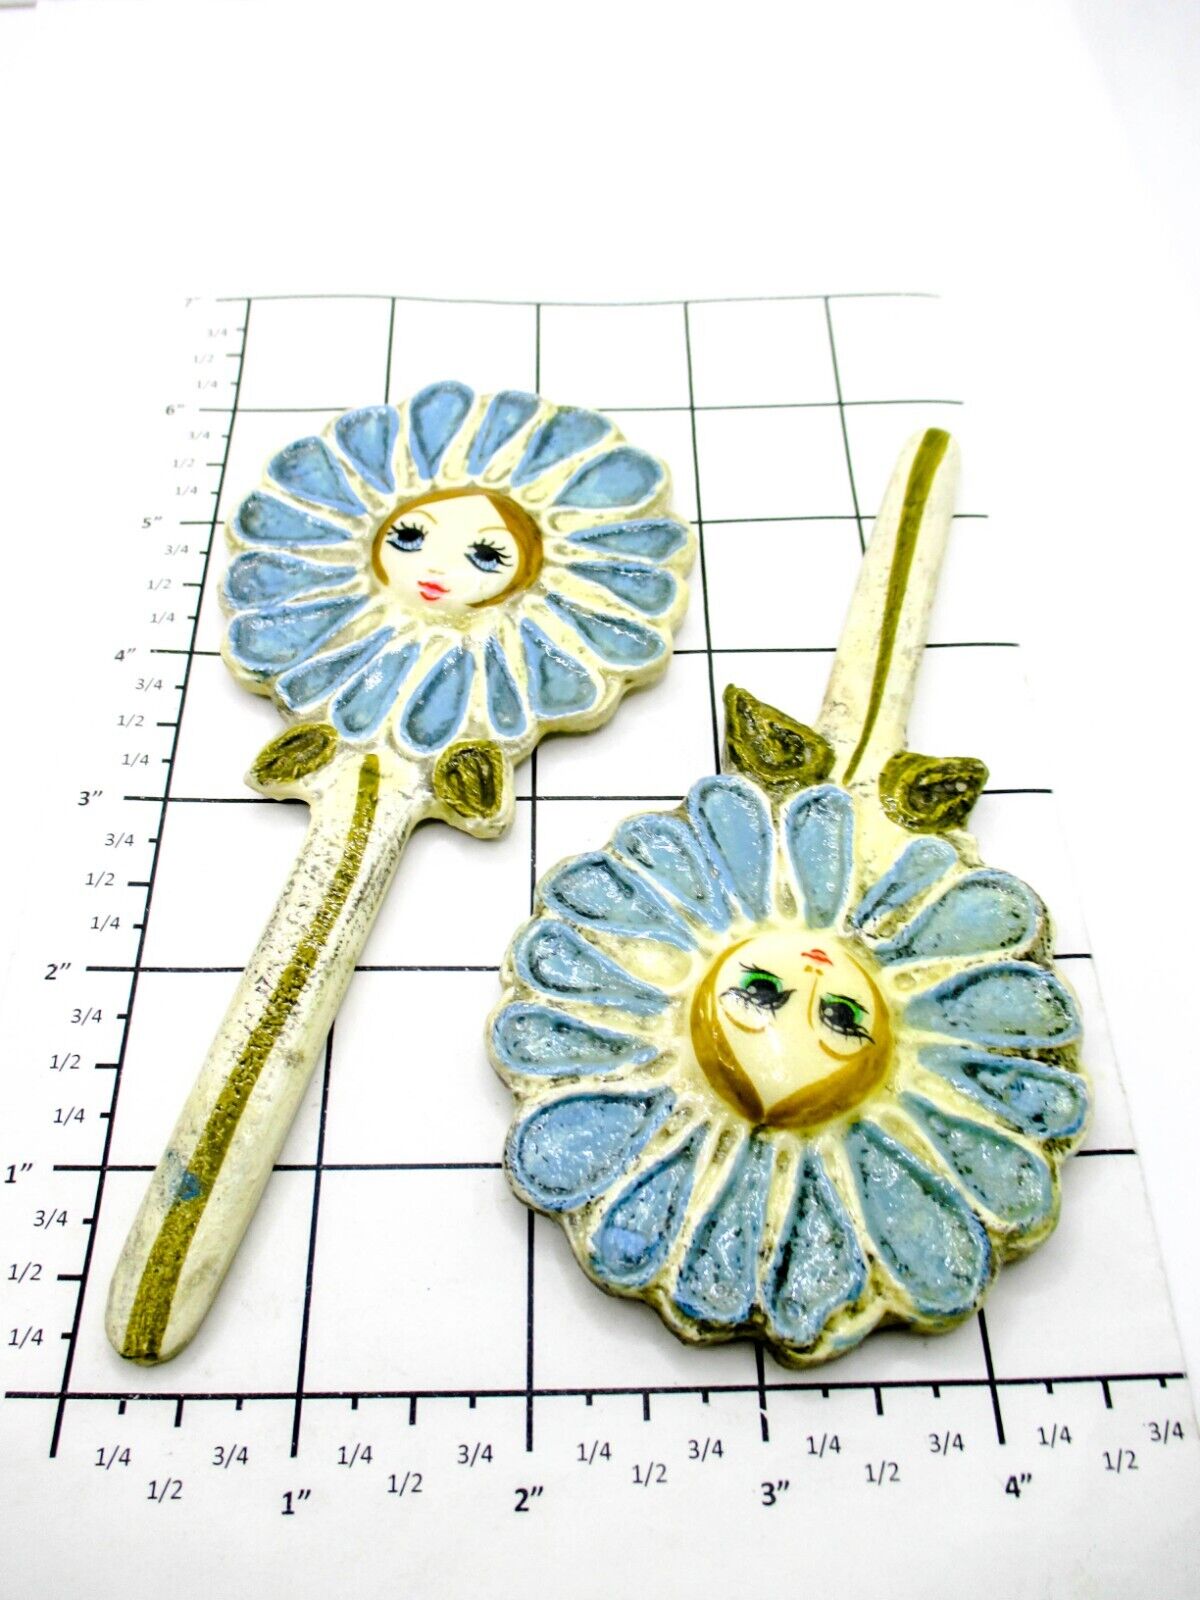 Vintage Hand Mirror Set of 2 Very Old Looking Condition - Sunflower Girls